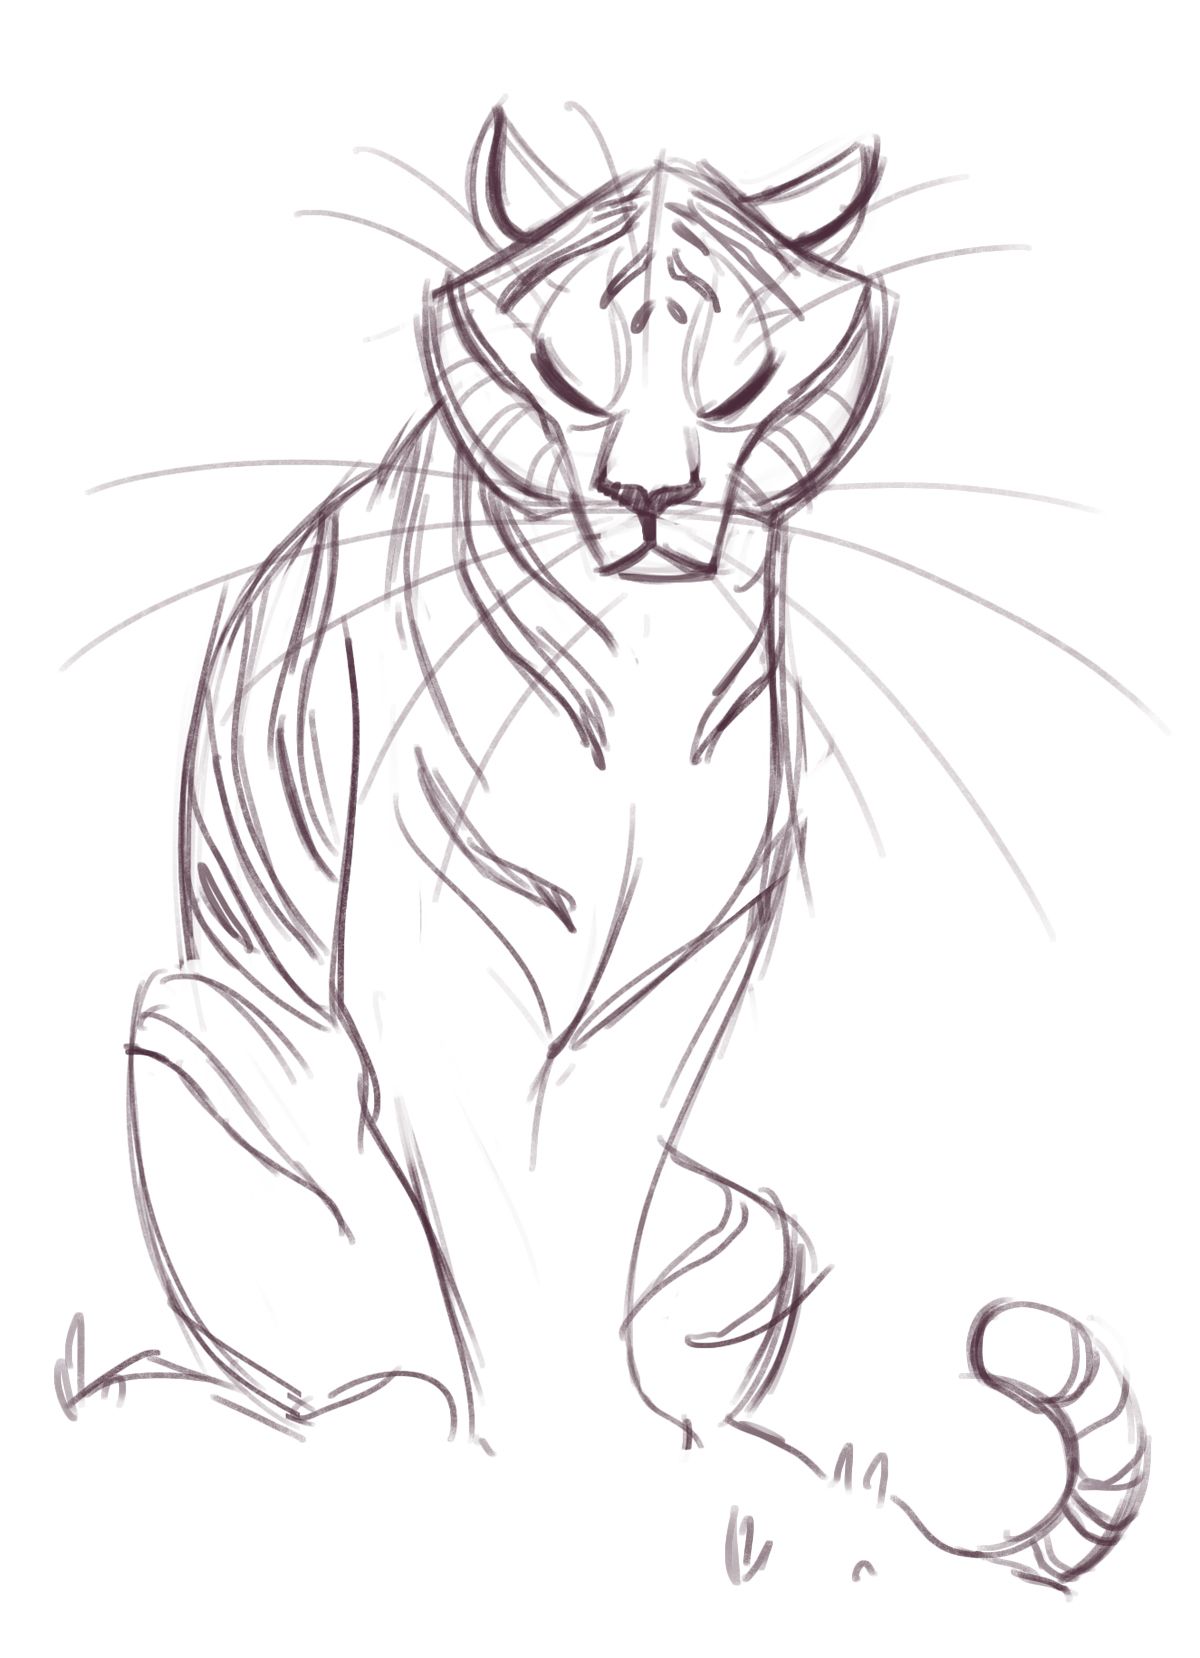 181: Tiger Sketch | ART - I likes what they drew | Pinterest | Tiger ...